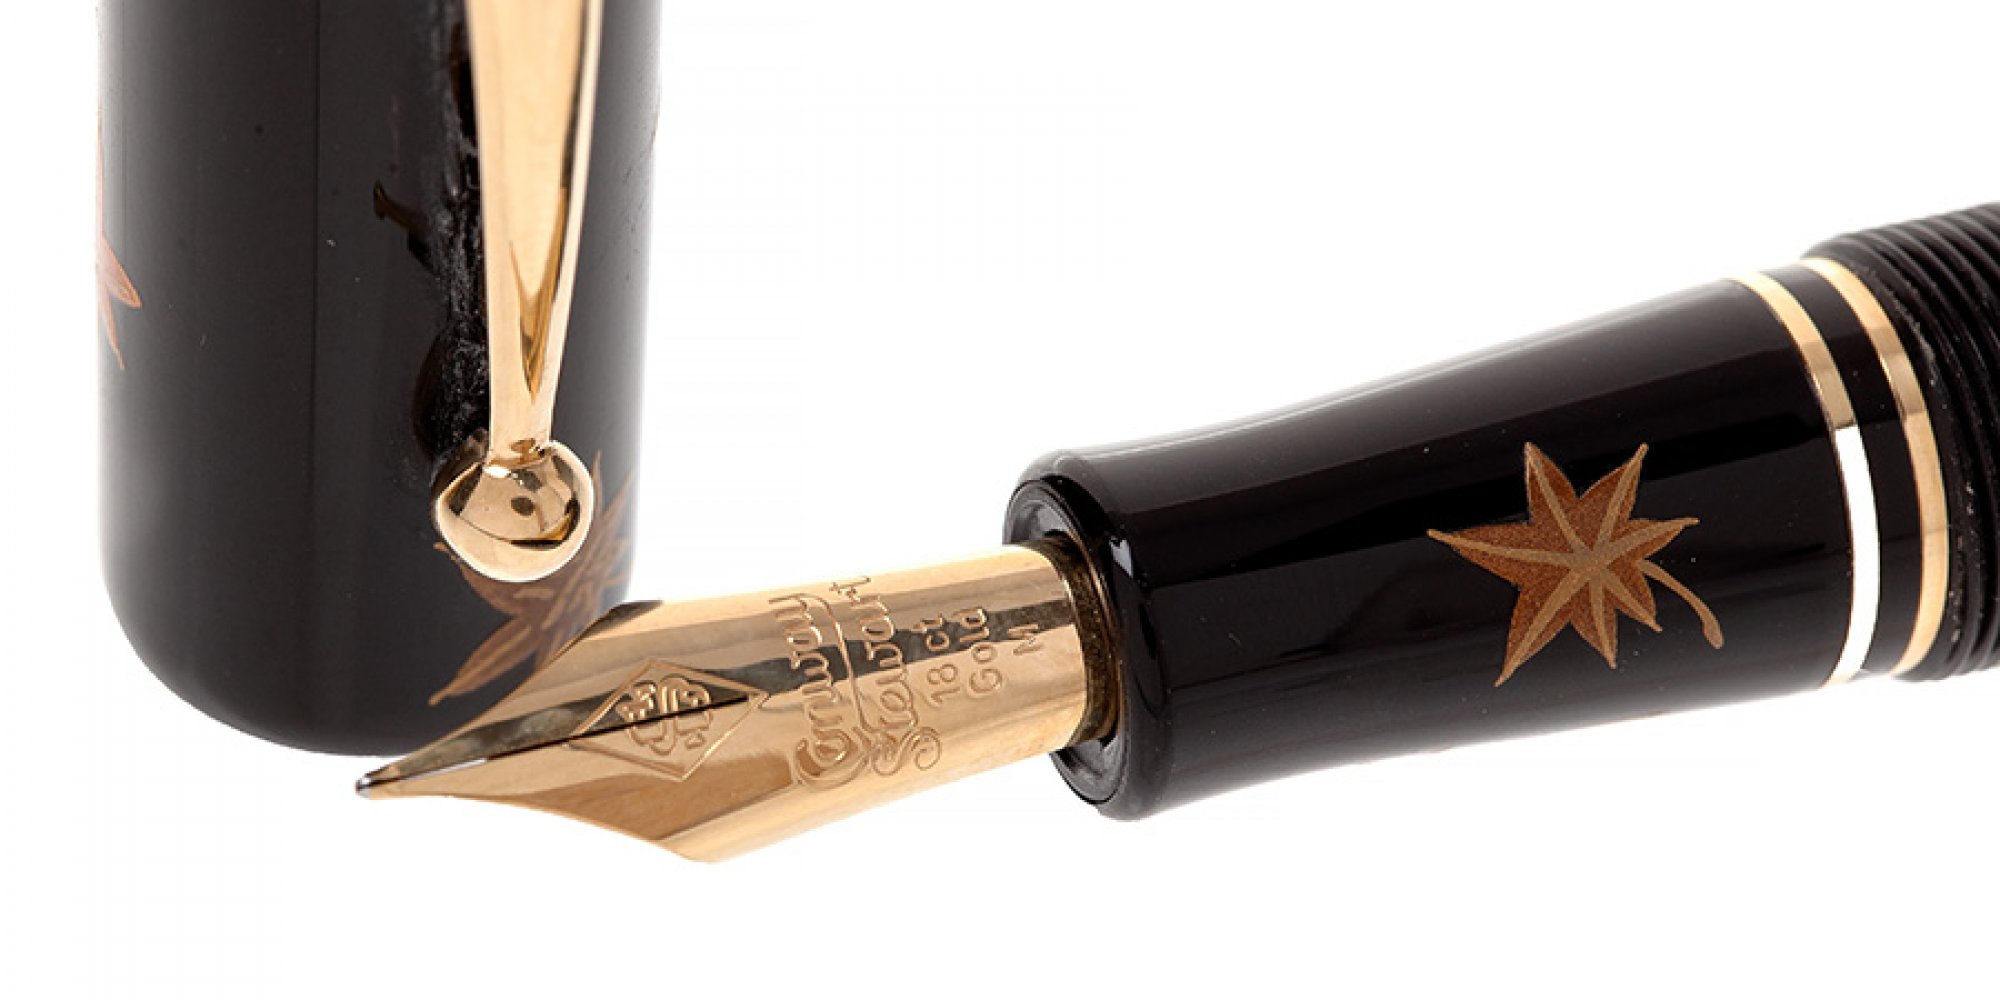 PELIKAN MAKI-E GINKO & MAPLE LEAVES FOUNTAIN PEN, LIMITED EDITION.Barrel in Japanese lacquer and - Image 2 of 3